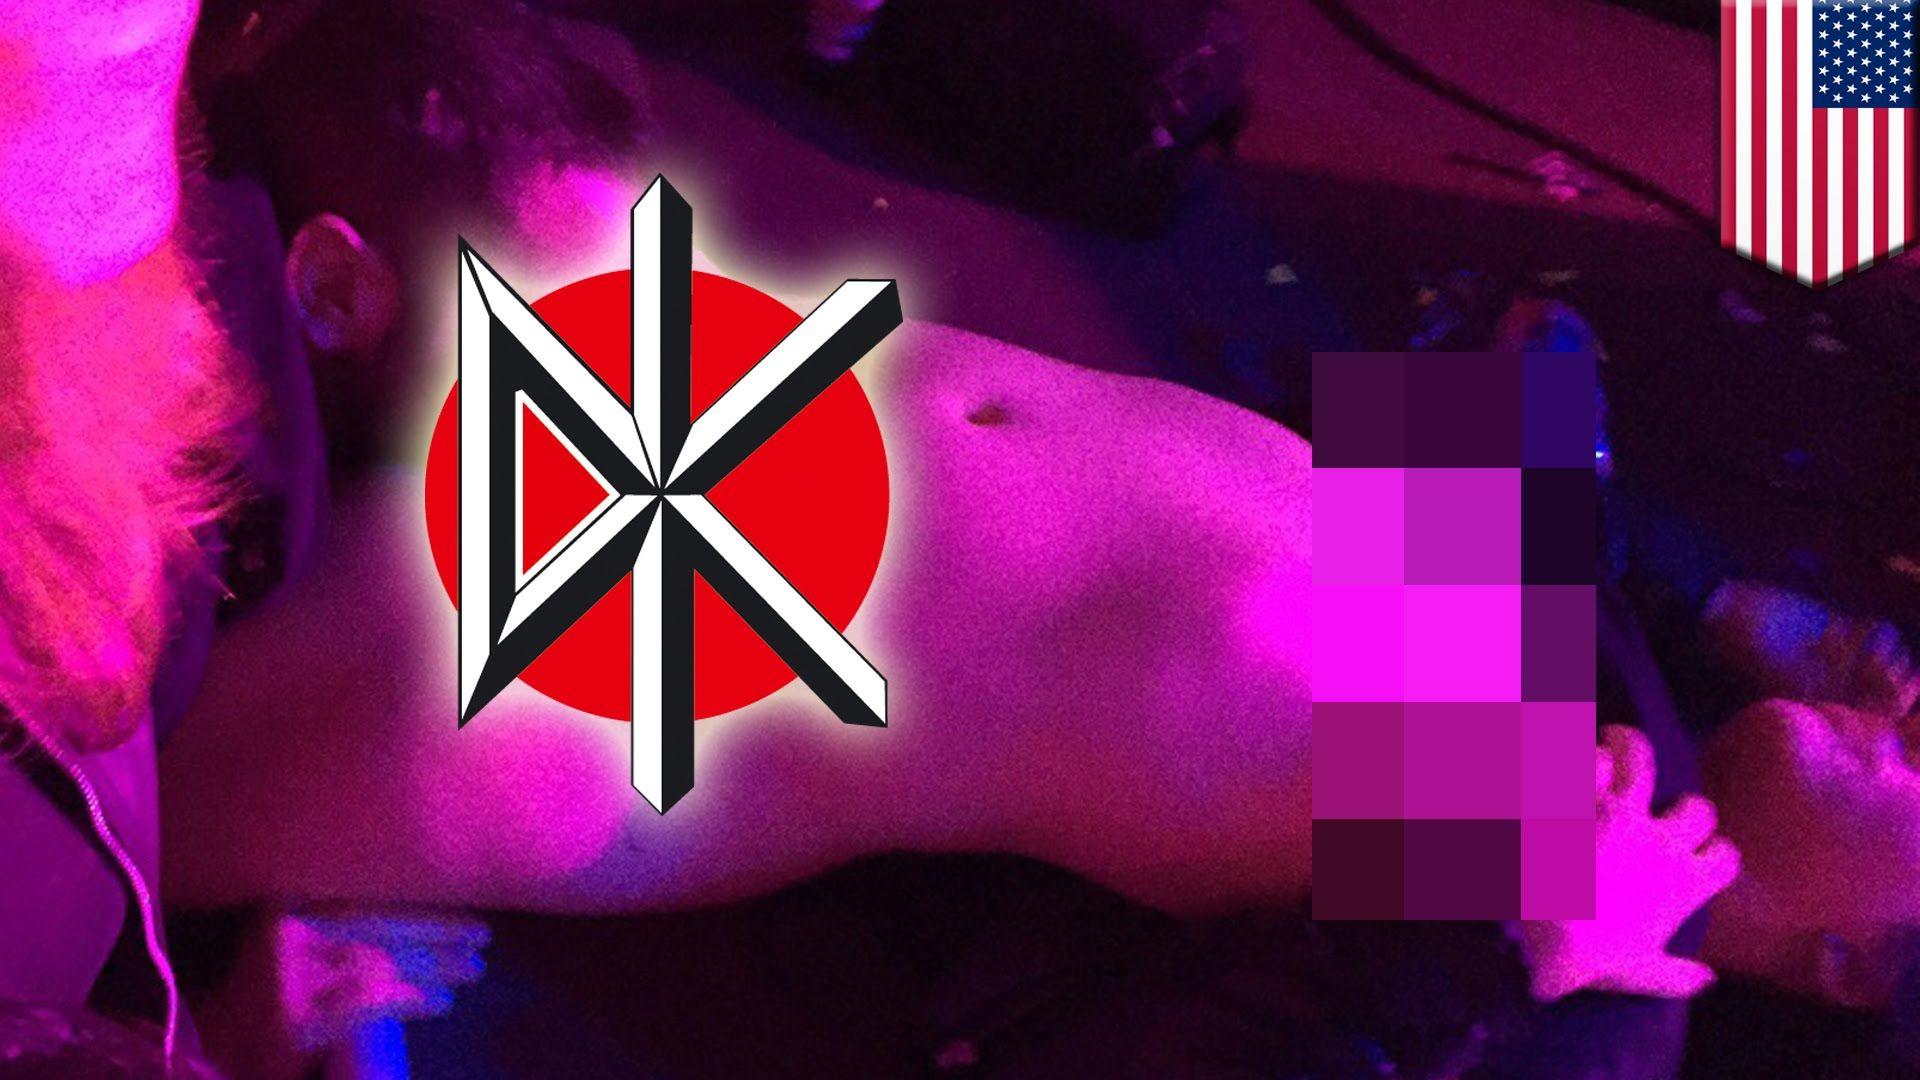 Public sex: Dead Kennedys fans give performance at Belly Up